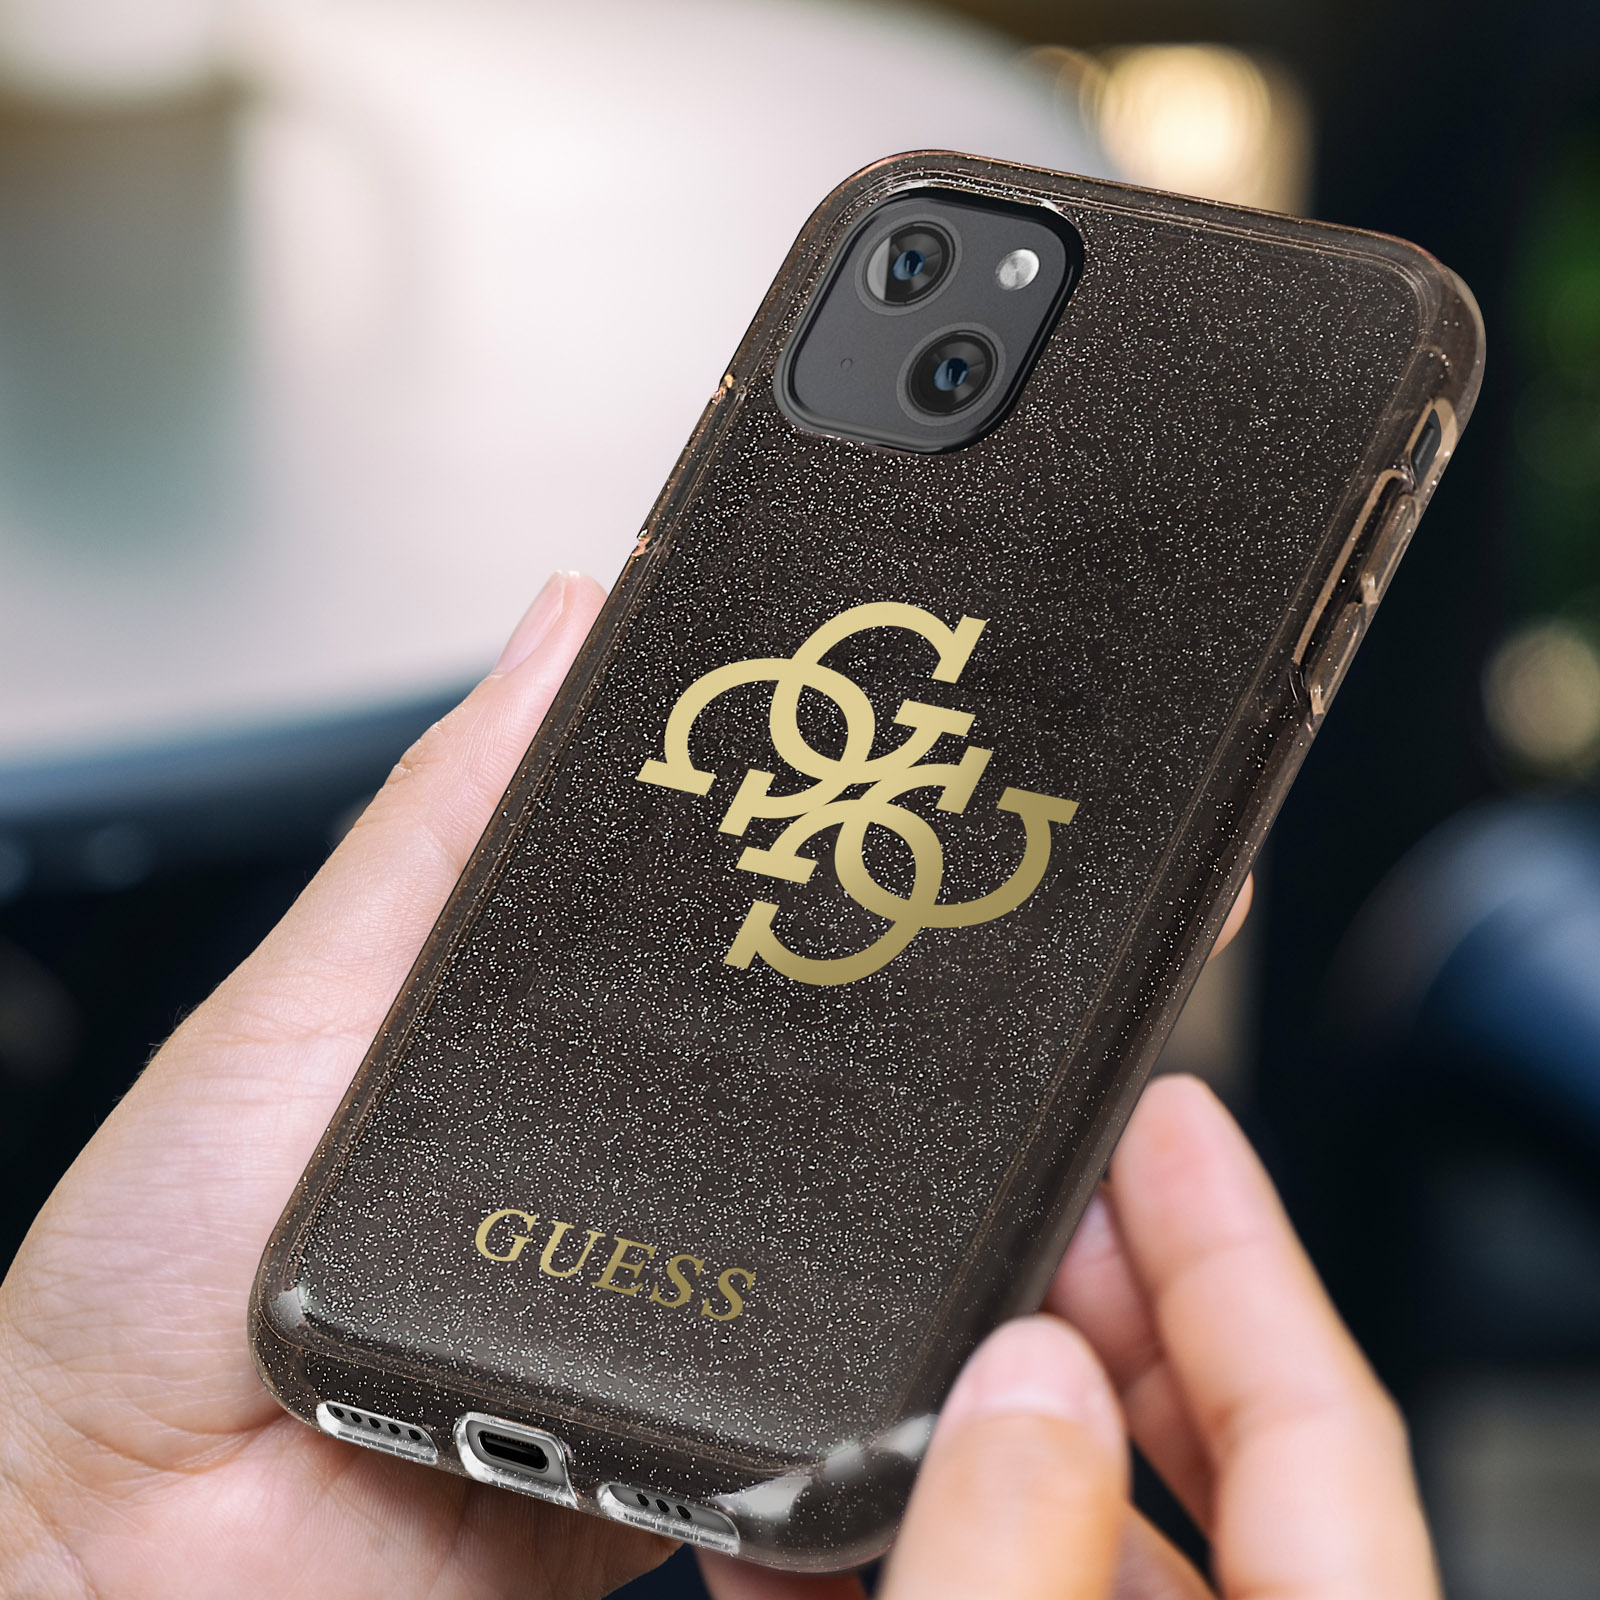 GUESS Glitter 4G Angabe 13 13 Keine Mini, - Logo Big Case (Gold), mini for Backcover, iPhone iPhone Apple